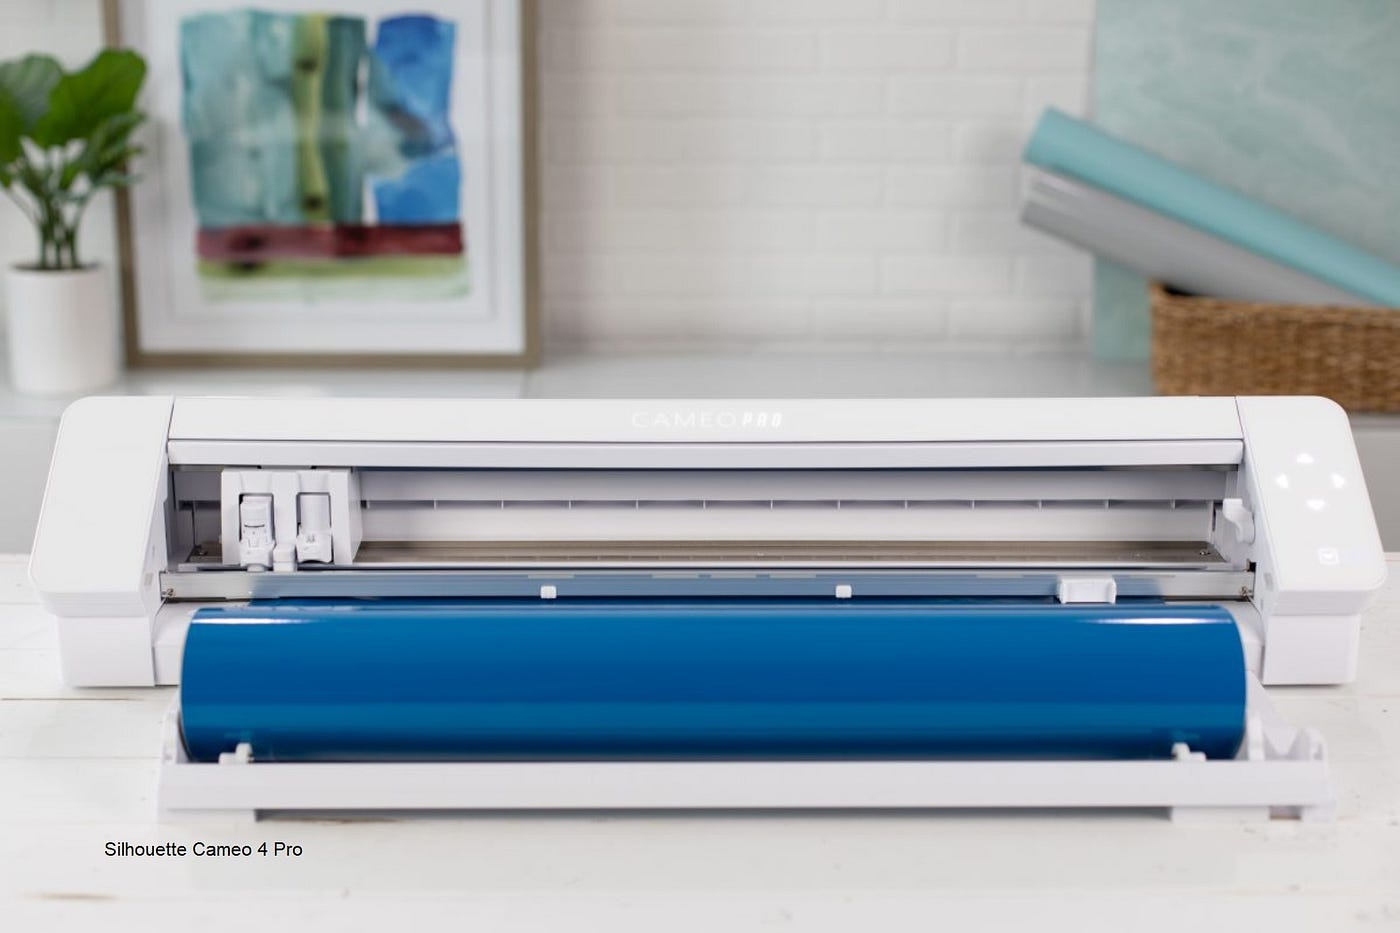 5 Best Printer To Use With Silhouette Cameo in 2022, by Stanleyradnor